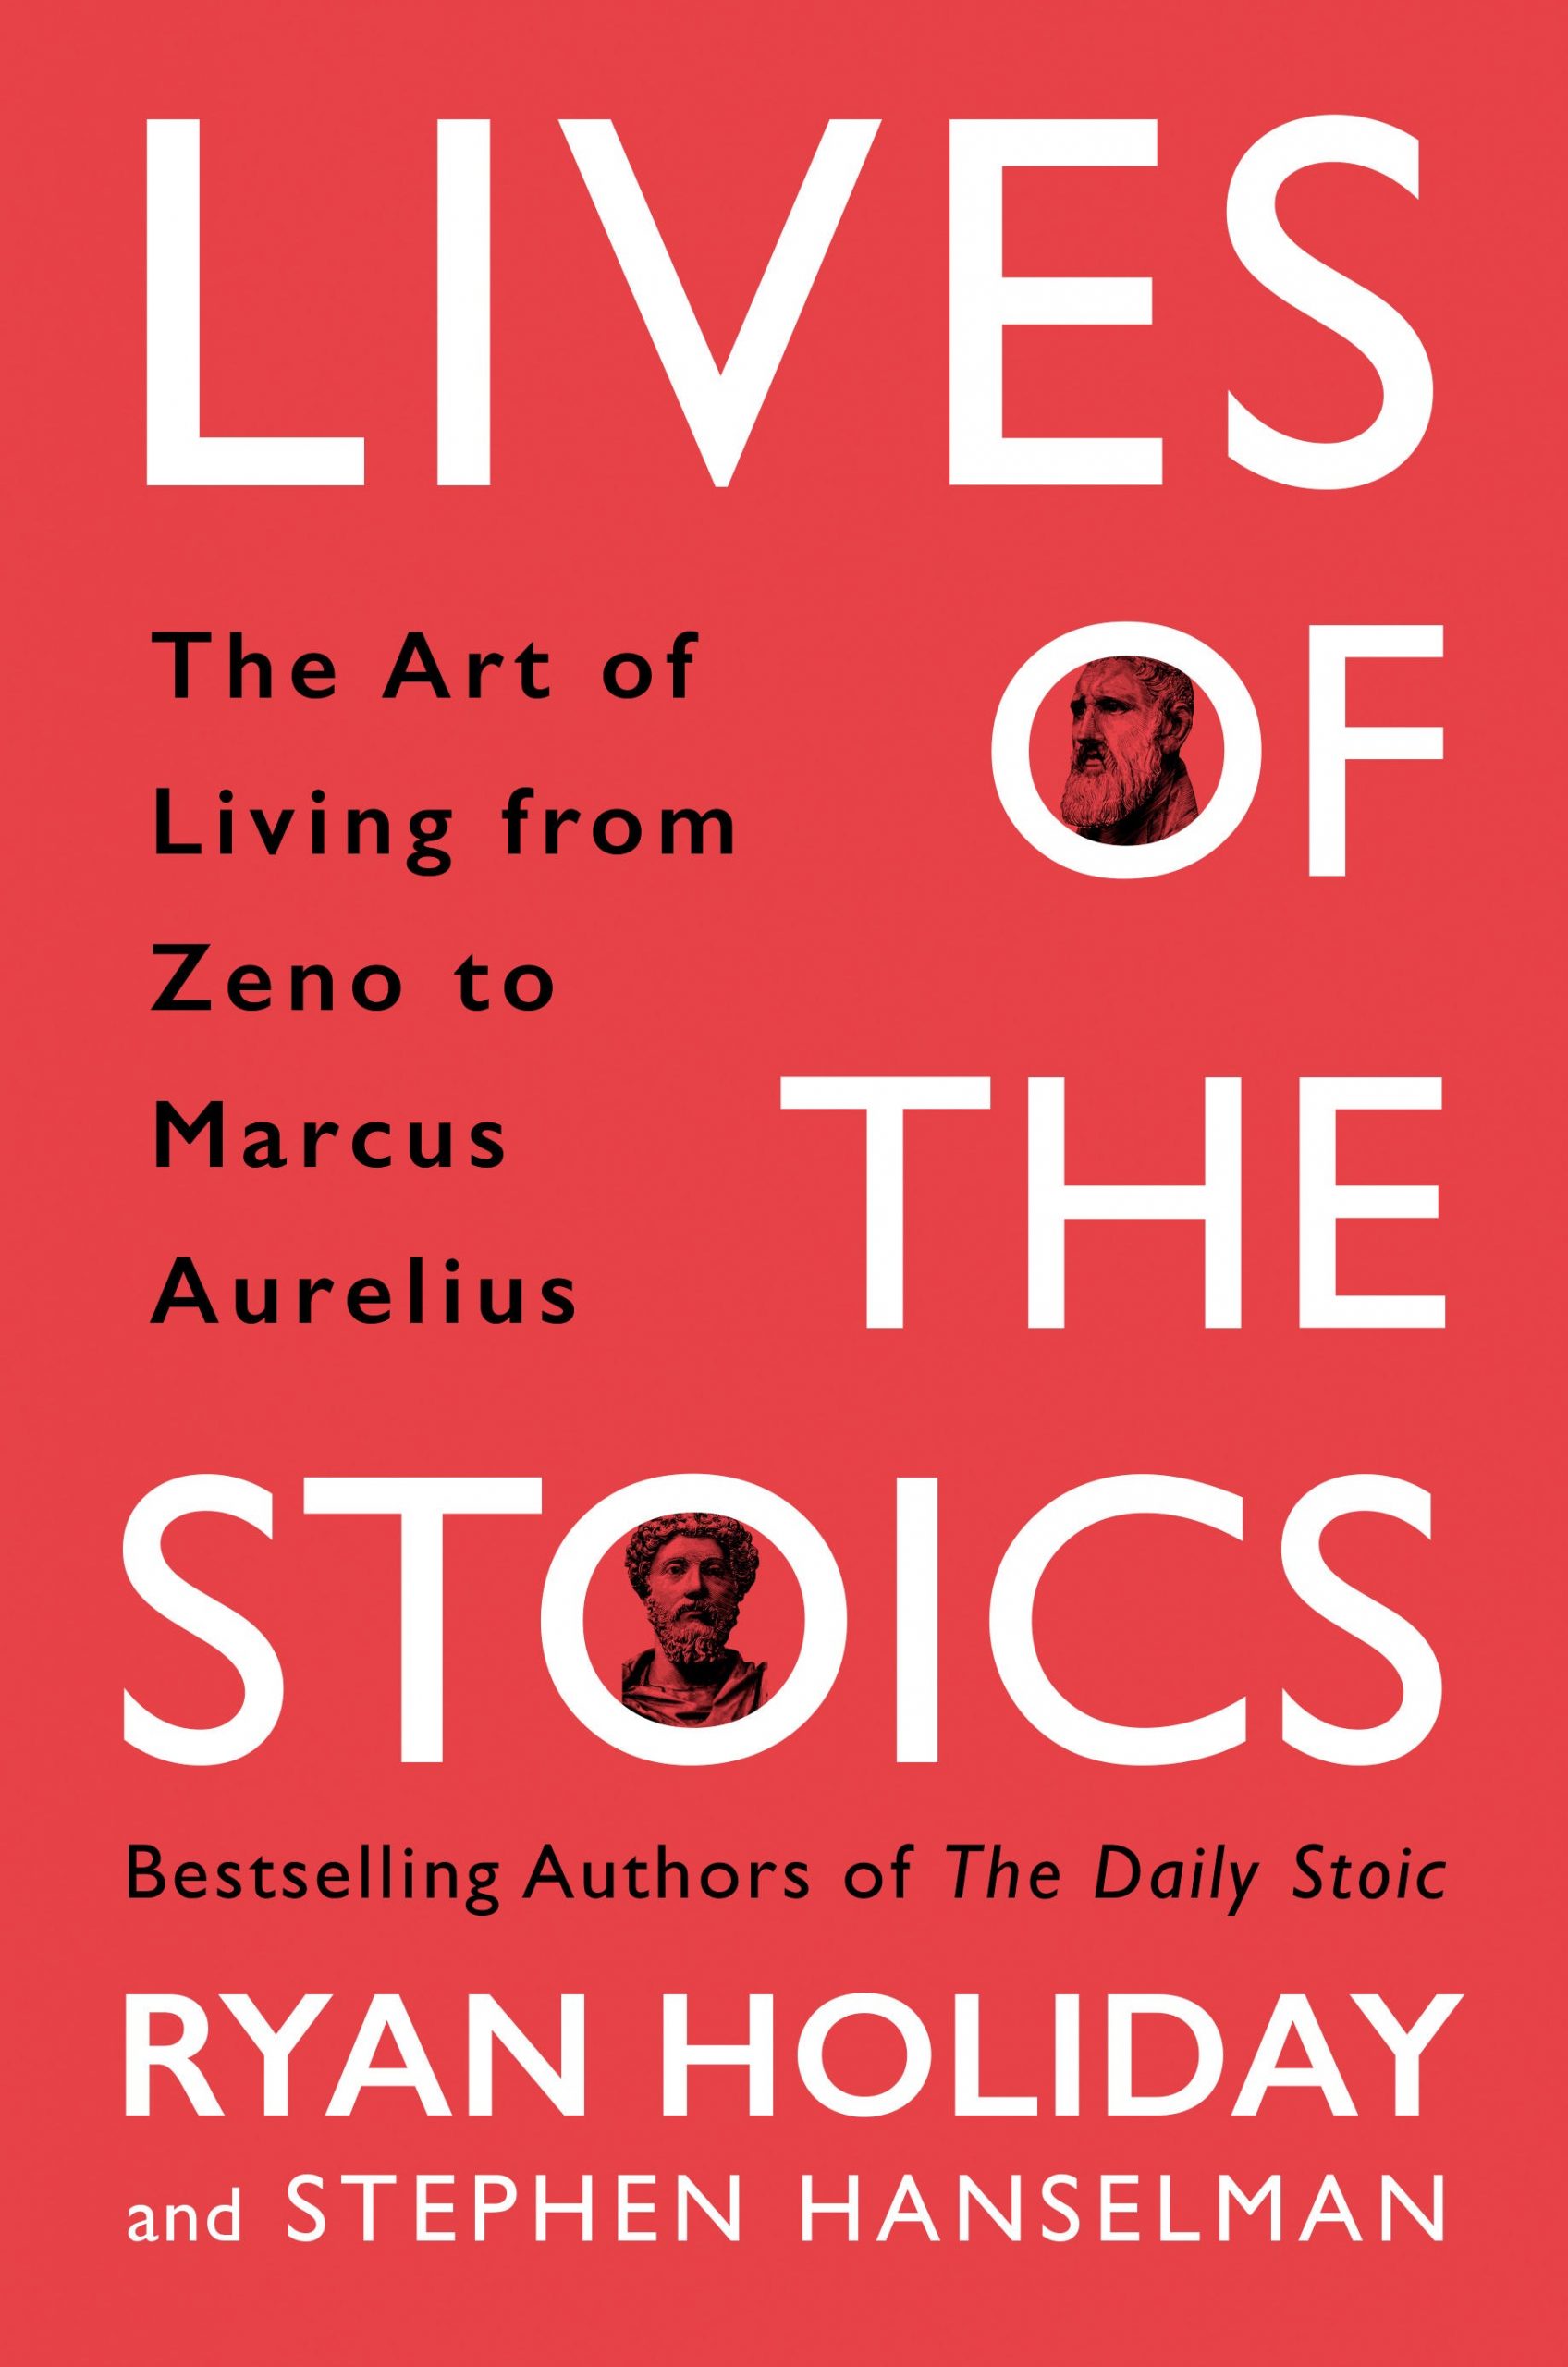 jacket_ final_LIVES OF THE STOICS